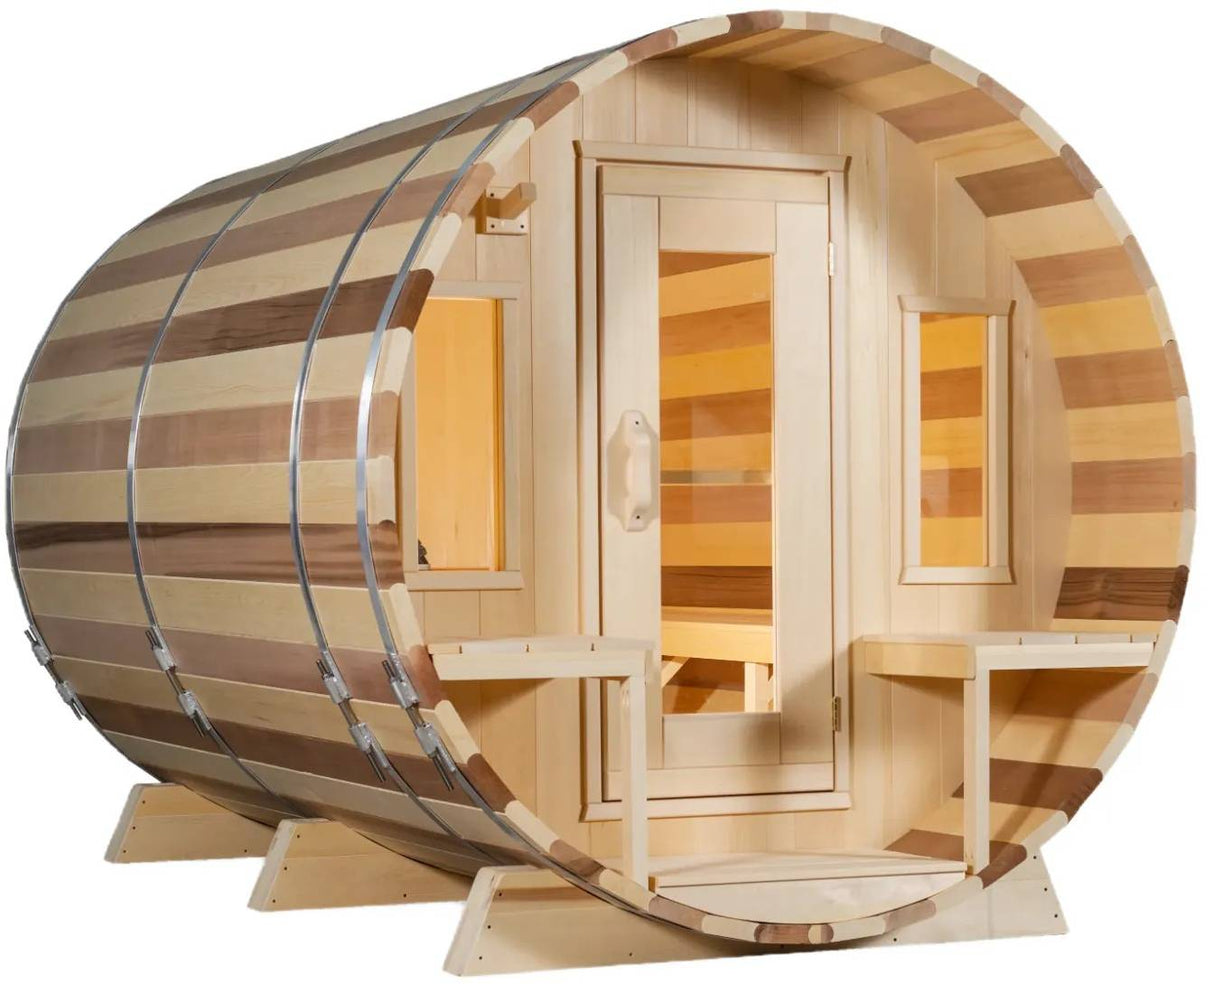 ZiahCare's Dundalk Tranquility 8 Person Outdoor Barrel Sauna Kit Mockup Image 4